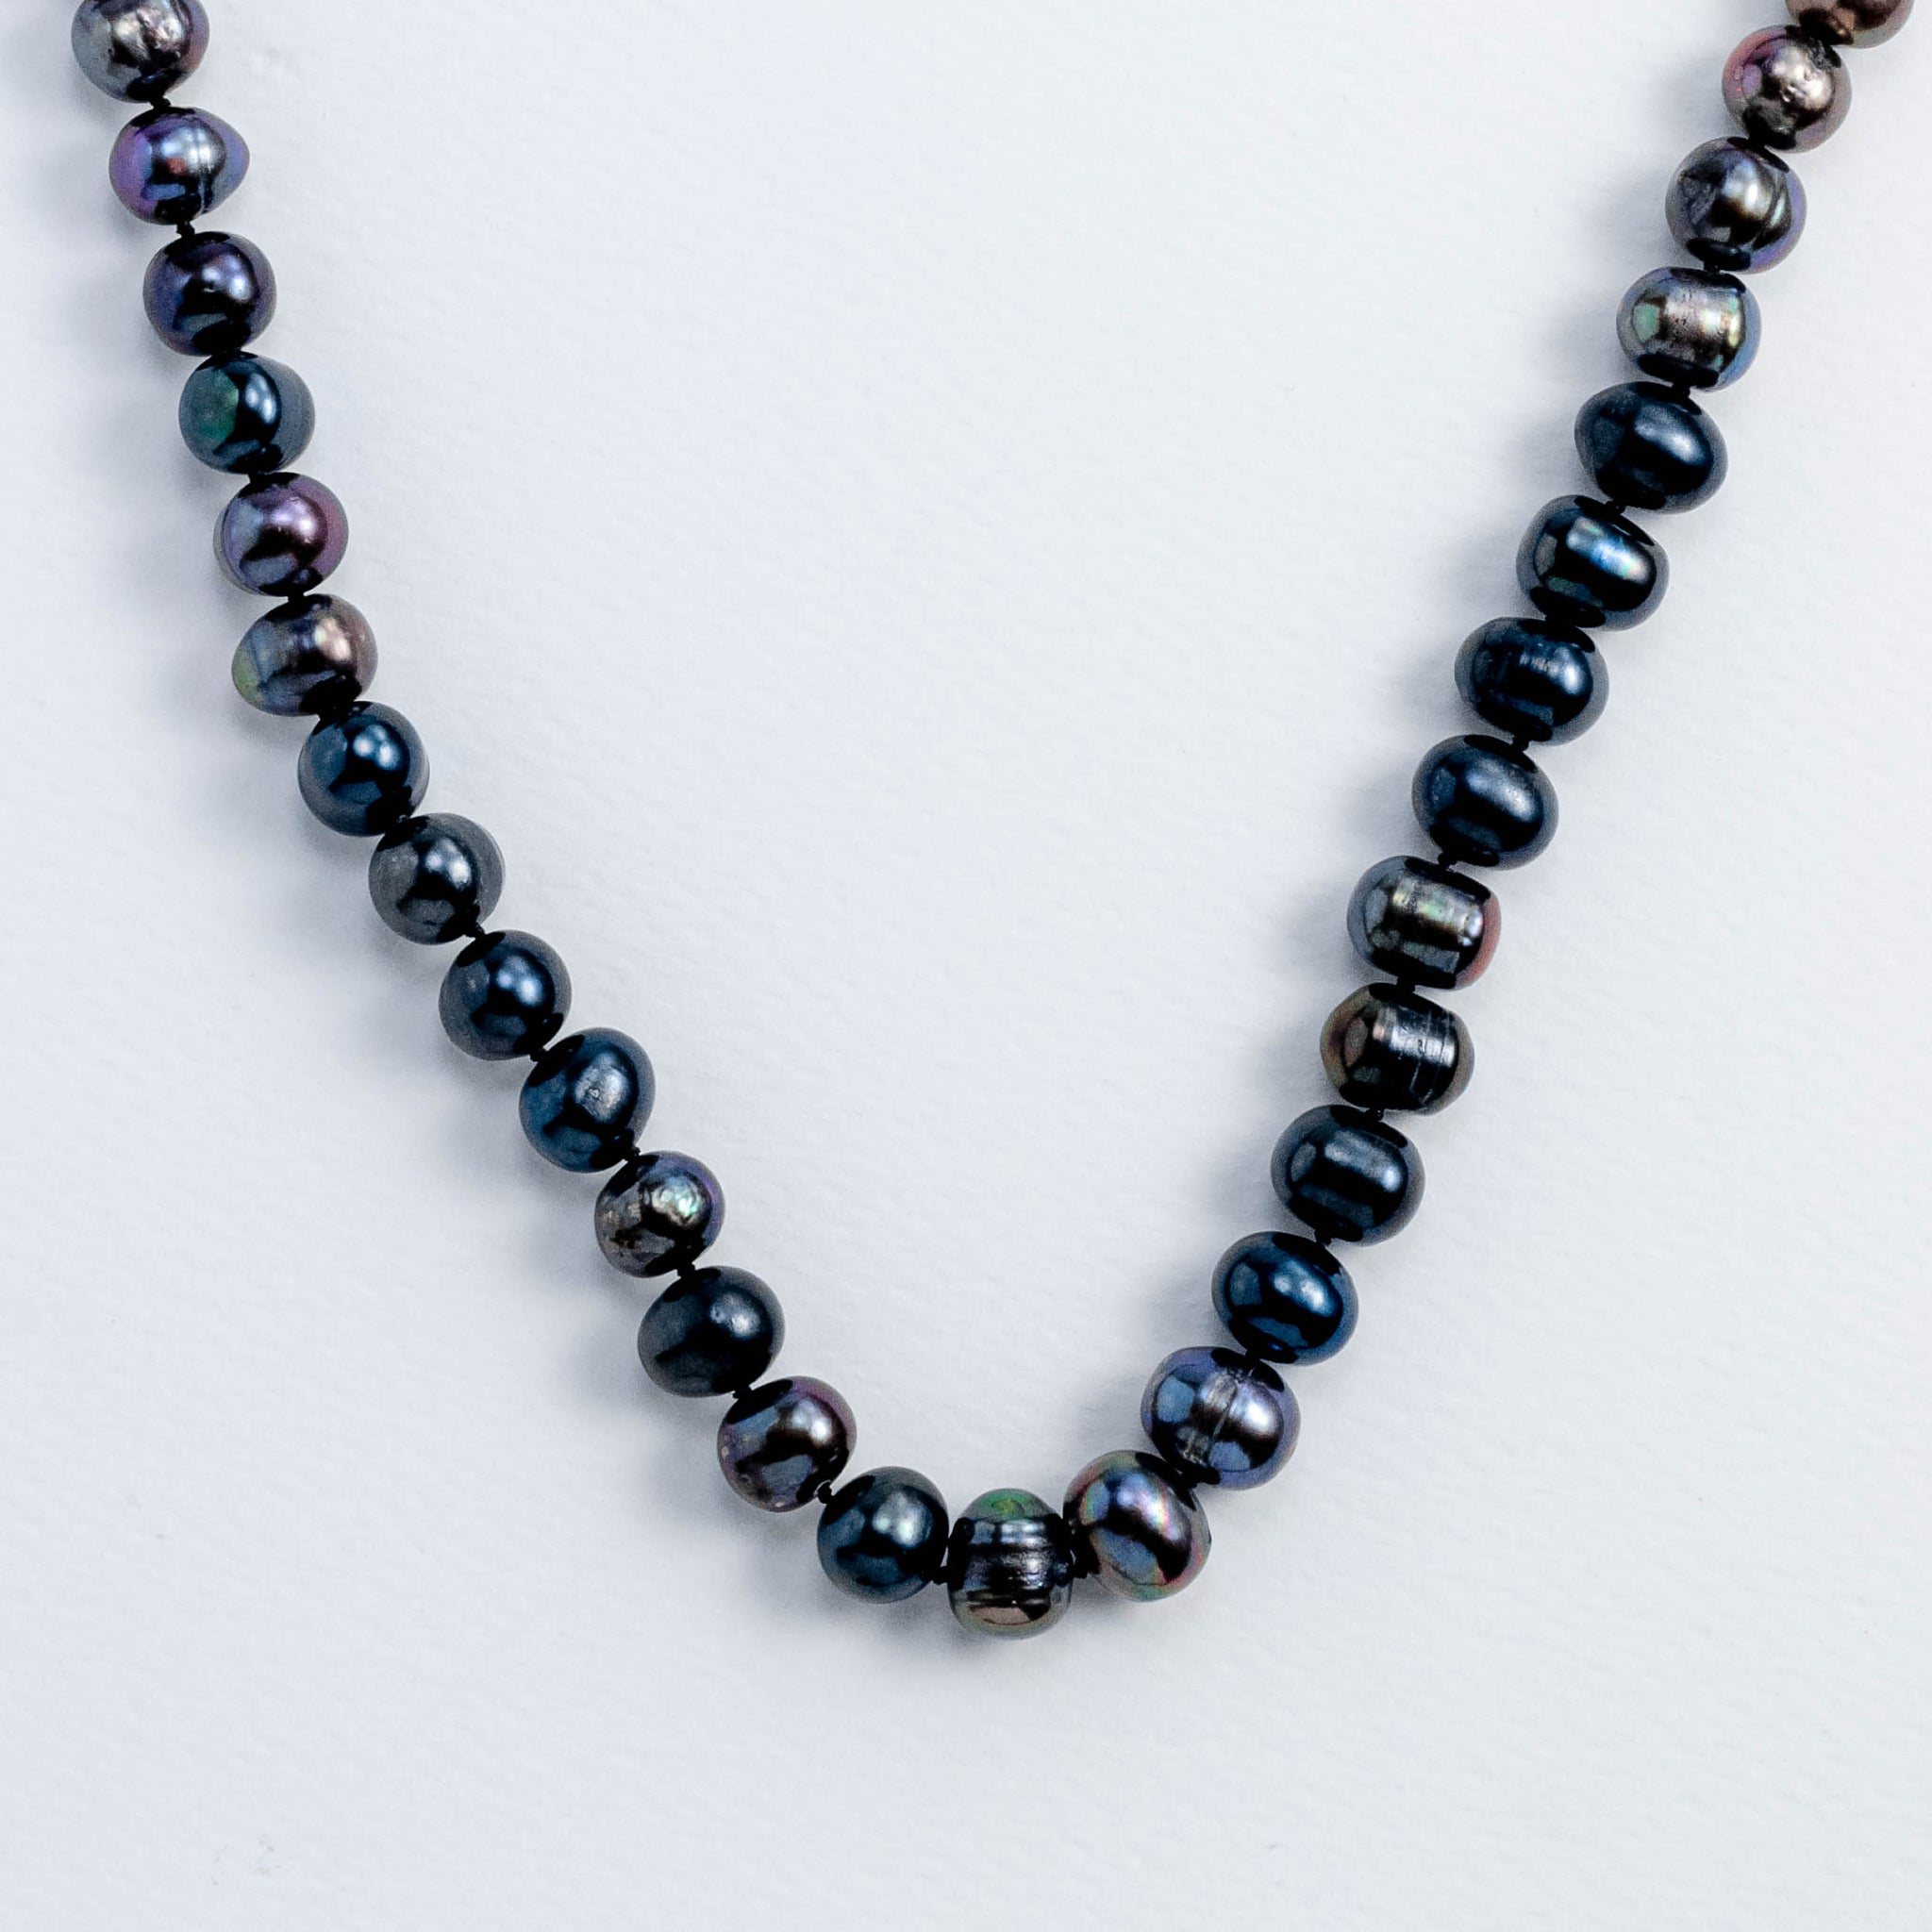 Black Pearl Necklace
(Long)